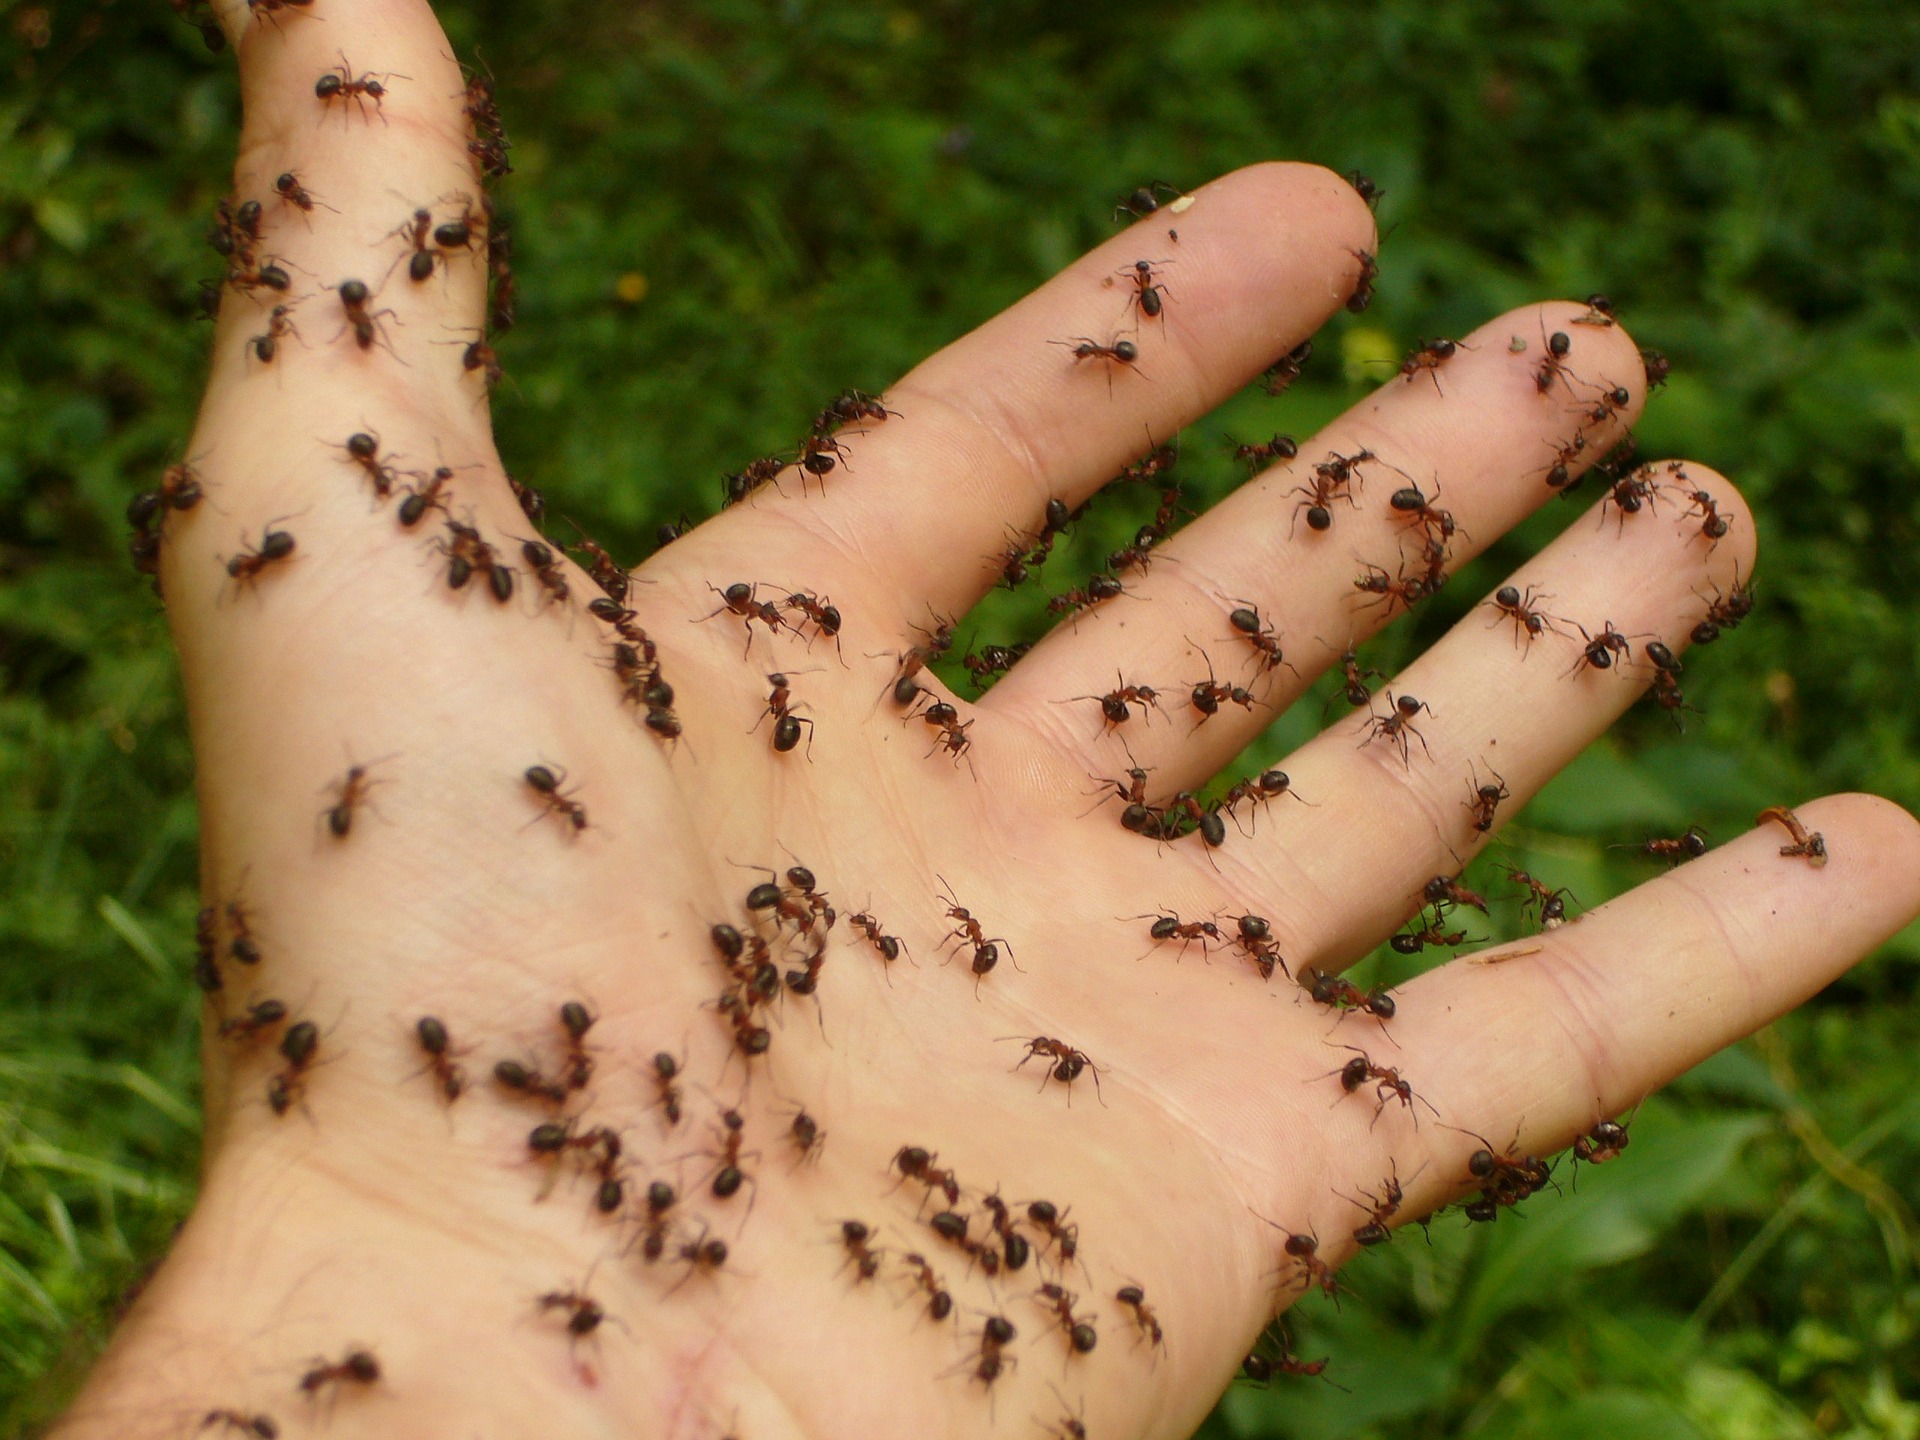 Do you know how to kill ANTS?